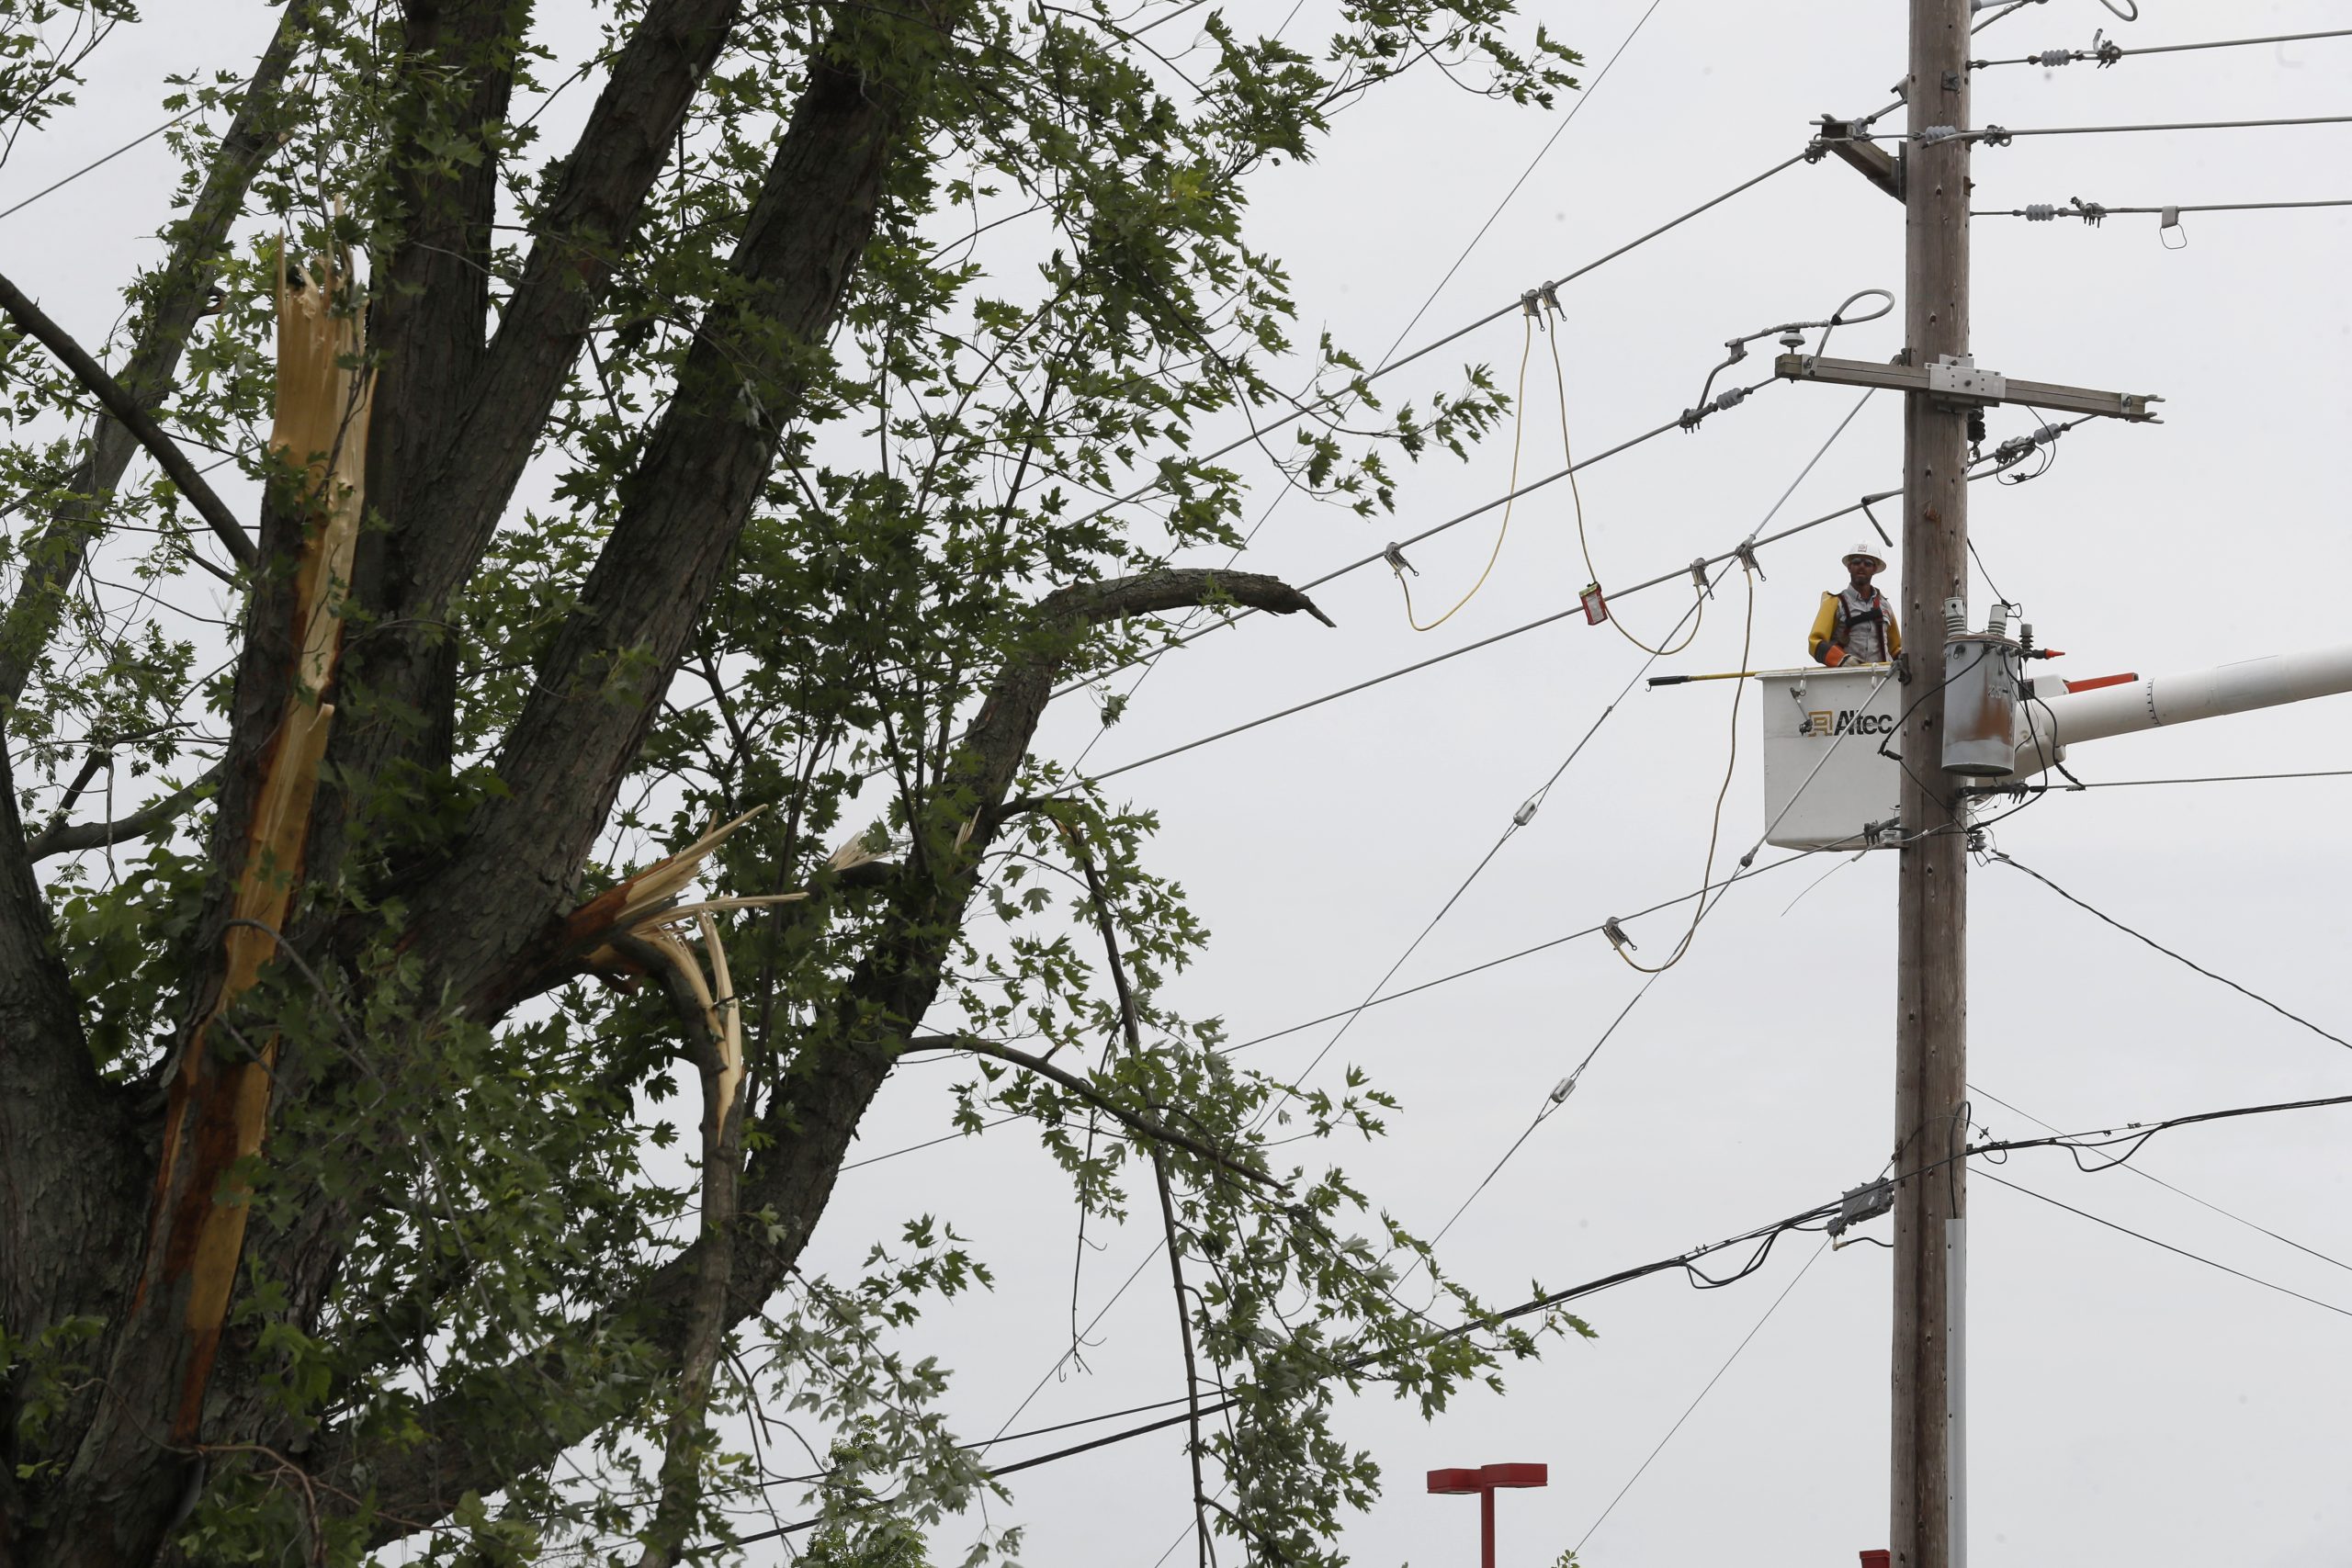 Utility workers address damaged power poles in May 2019, in Vandalia, Ohio, in the aftermath of strong tornadoes that spun through the Midwest.